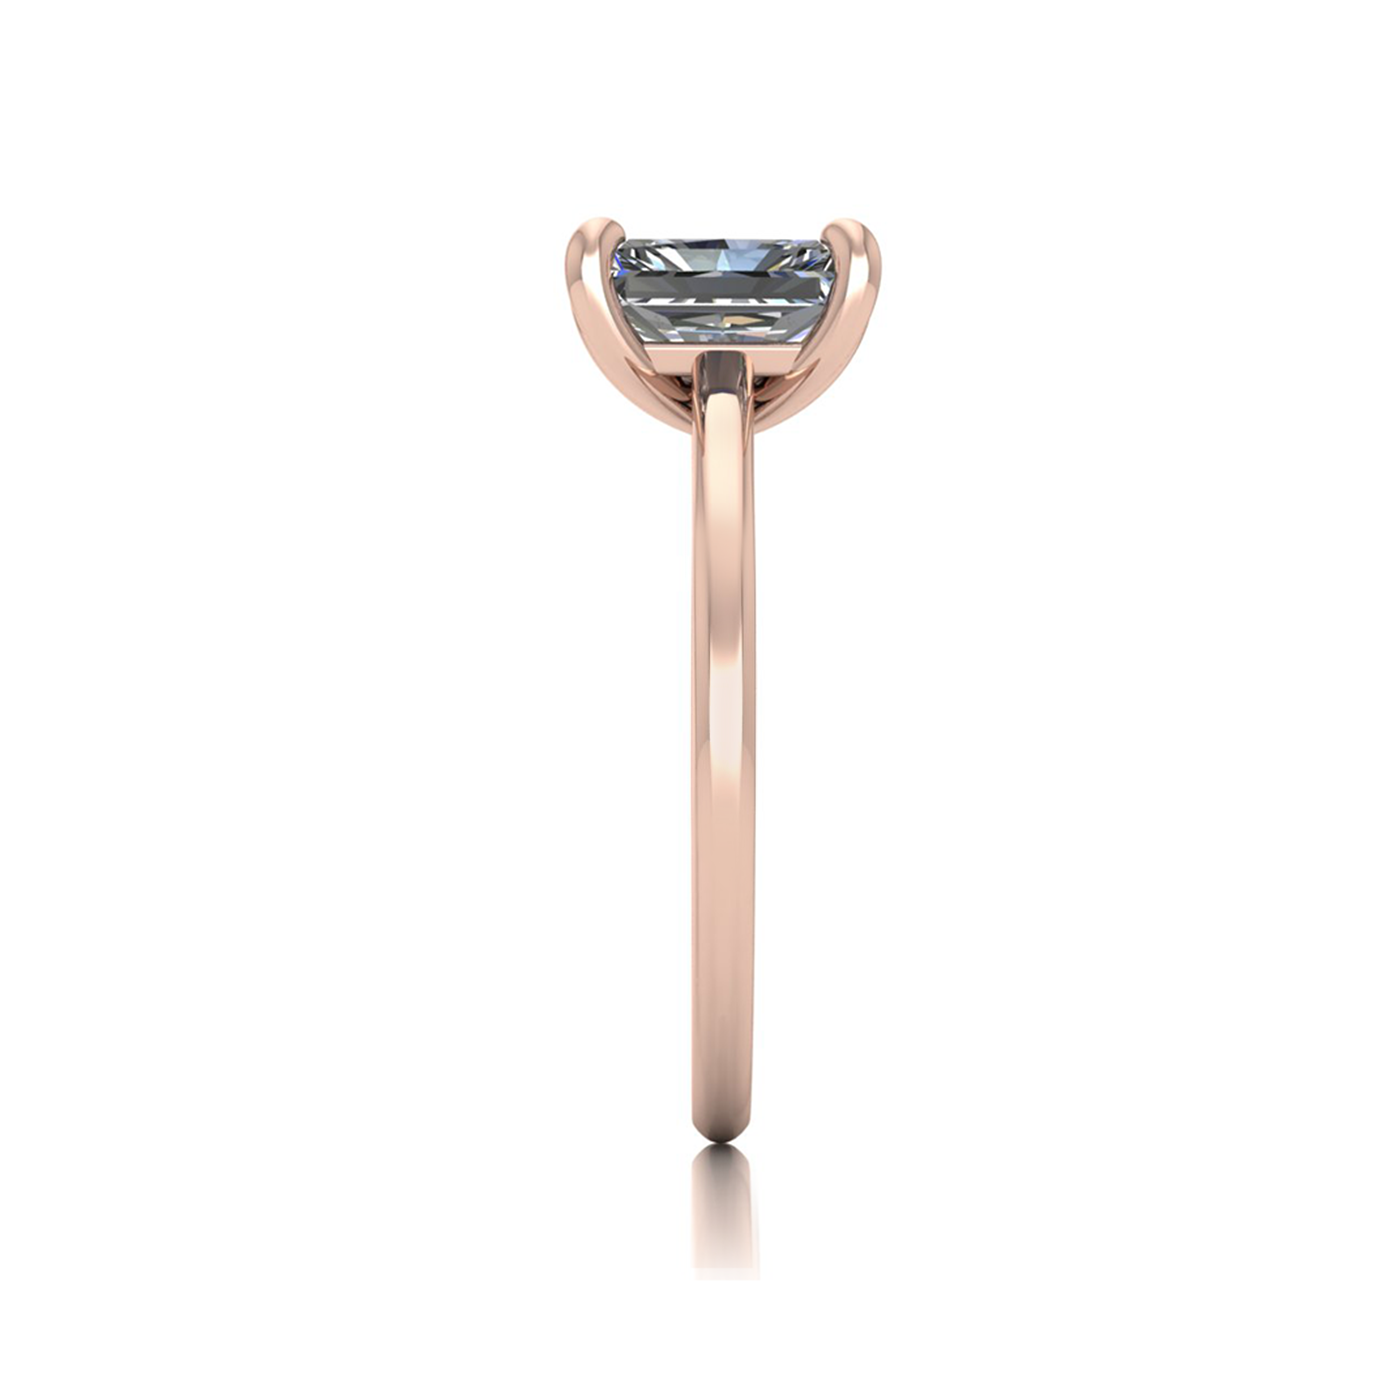 18k rose gold  1,50 ct 4 prongs solitaire radiant cut diamond engagement ring with whisper thin band